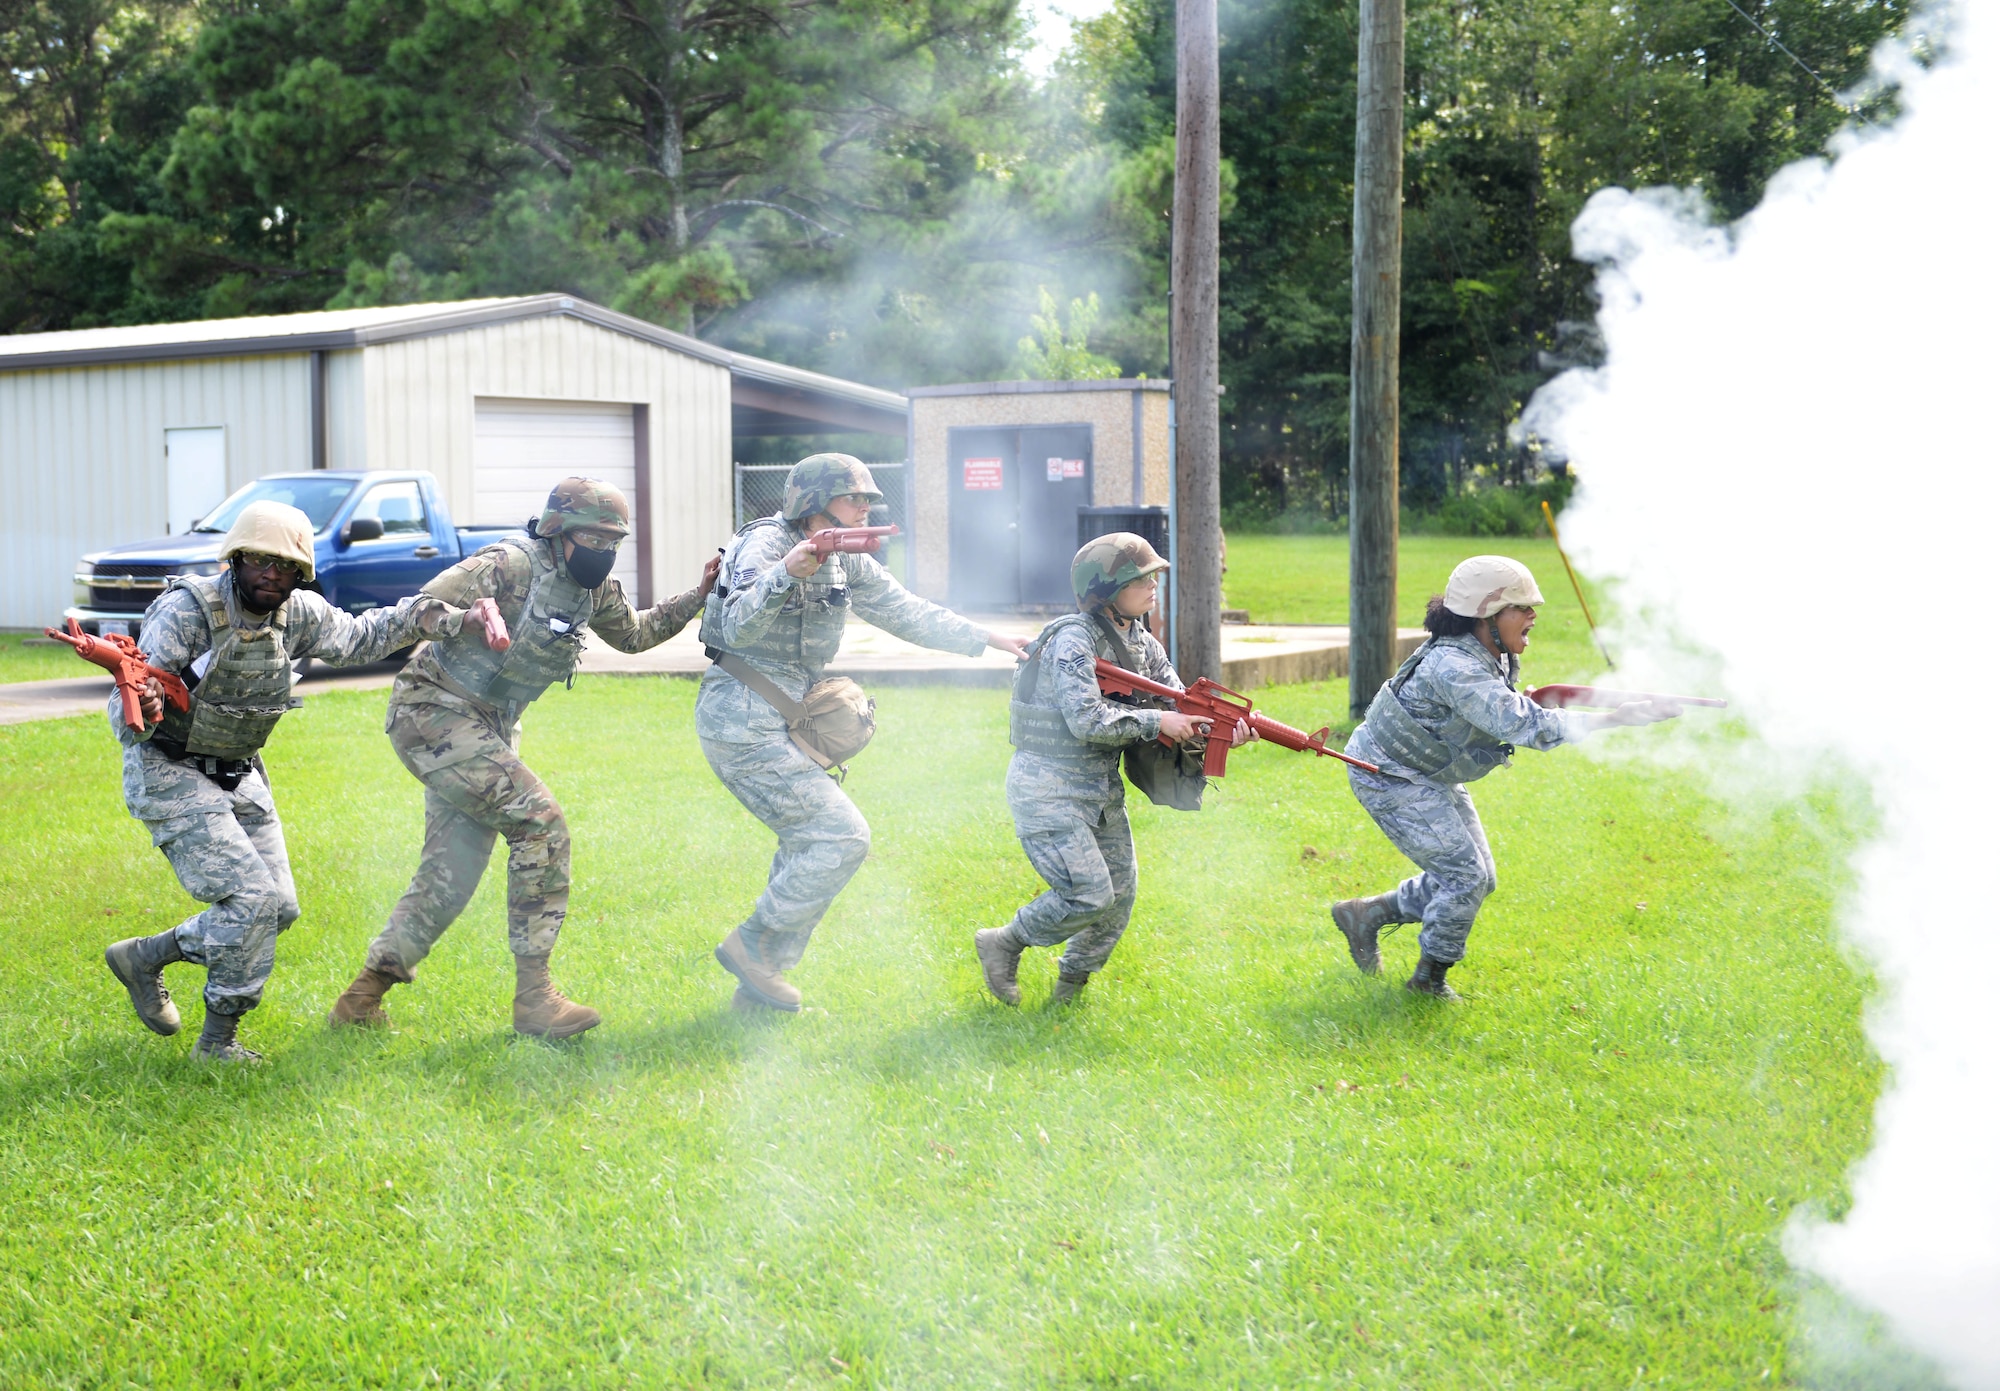 14th Medical Group Airmen use a line formation to get into the simulated battlefield during the Tactical Combat Casualty Care All Combatants course July 16, 2020, at the Kortiz Clinic on Columbus Air Force base, Miss. The 14th MDG held the Wing’s first on-site TCCC All Combatants course training 10 medics from Columbus AFB. (U.S. Air Force photo by Airman 1st Class Davis Donaldson)